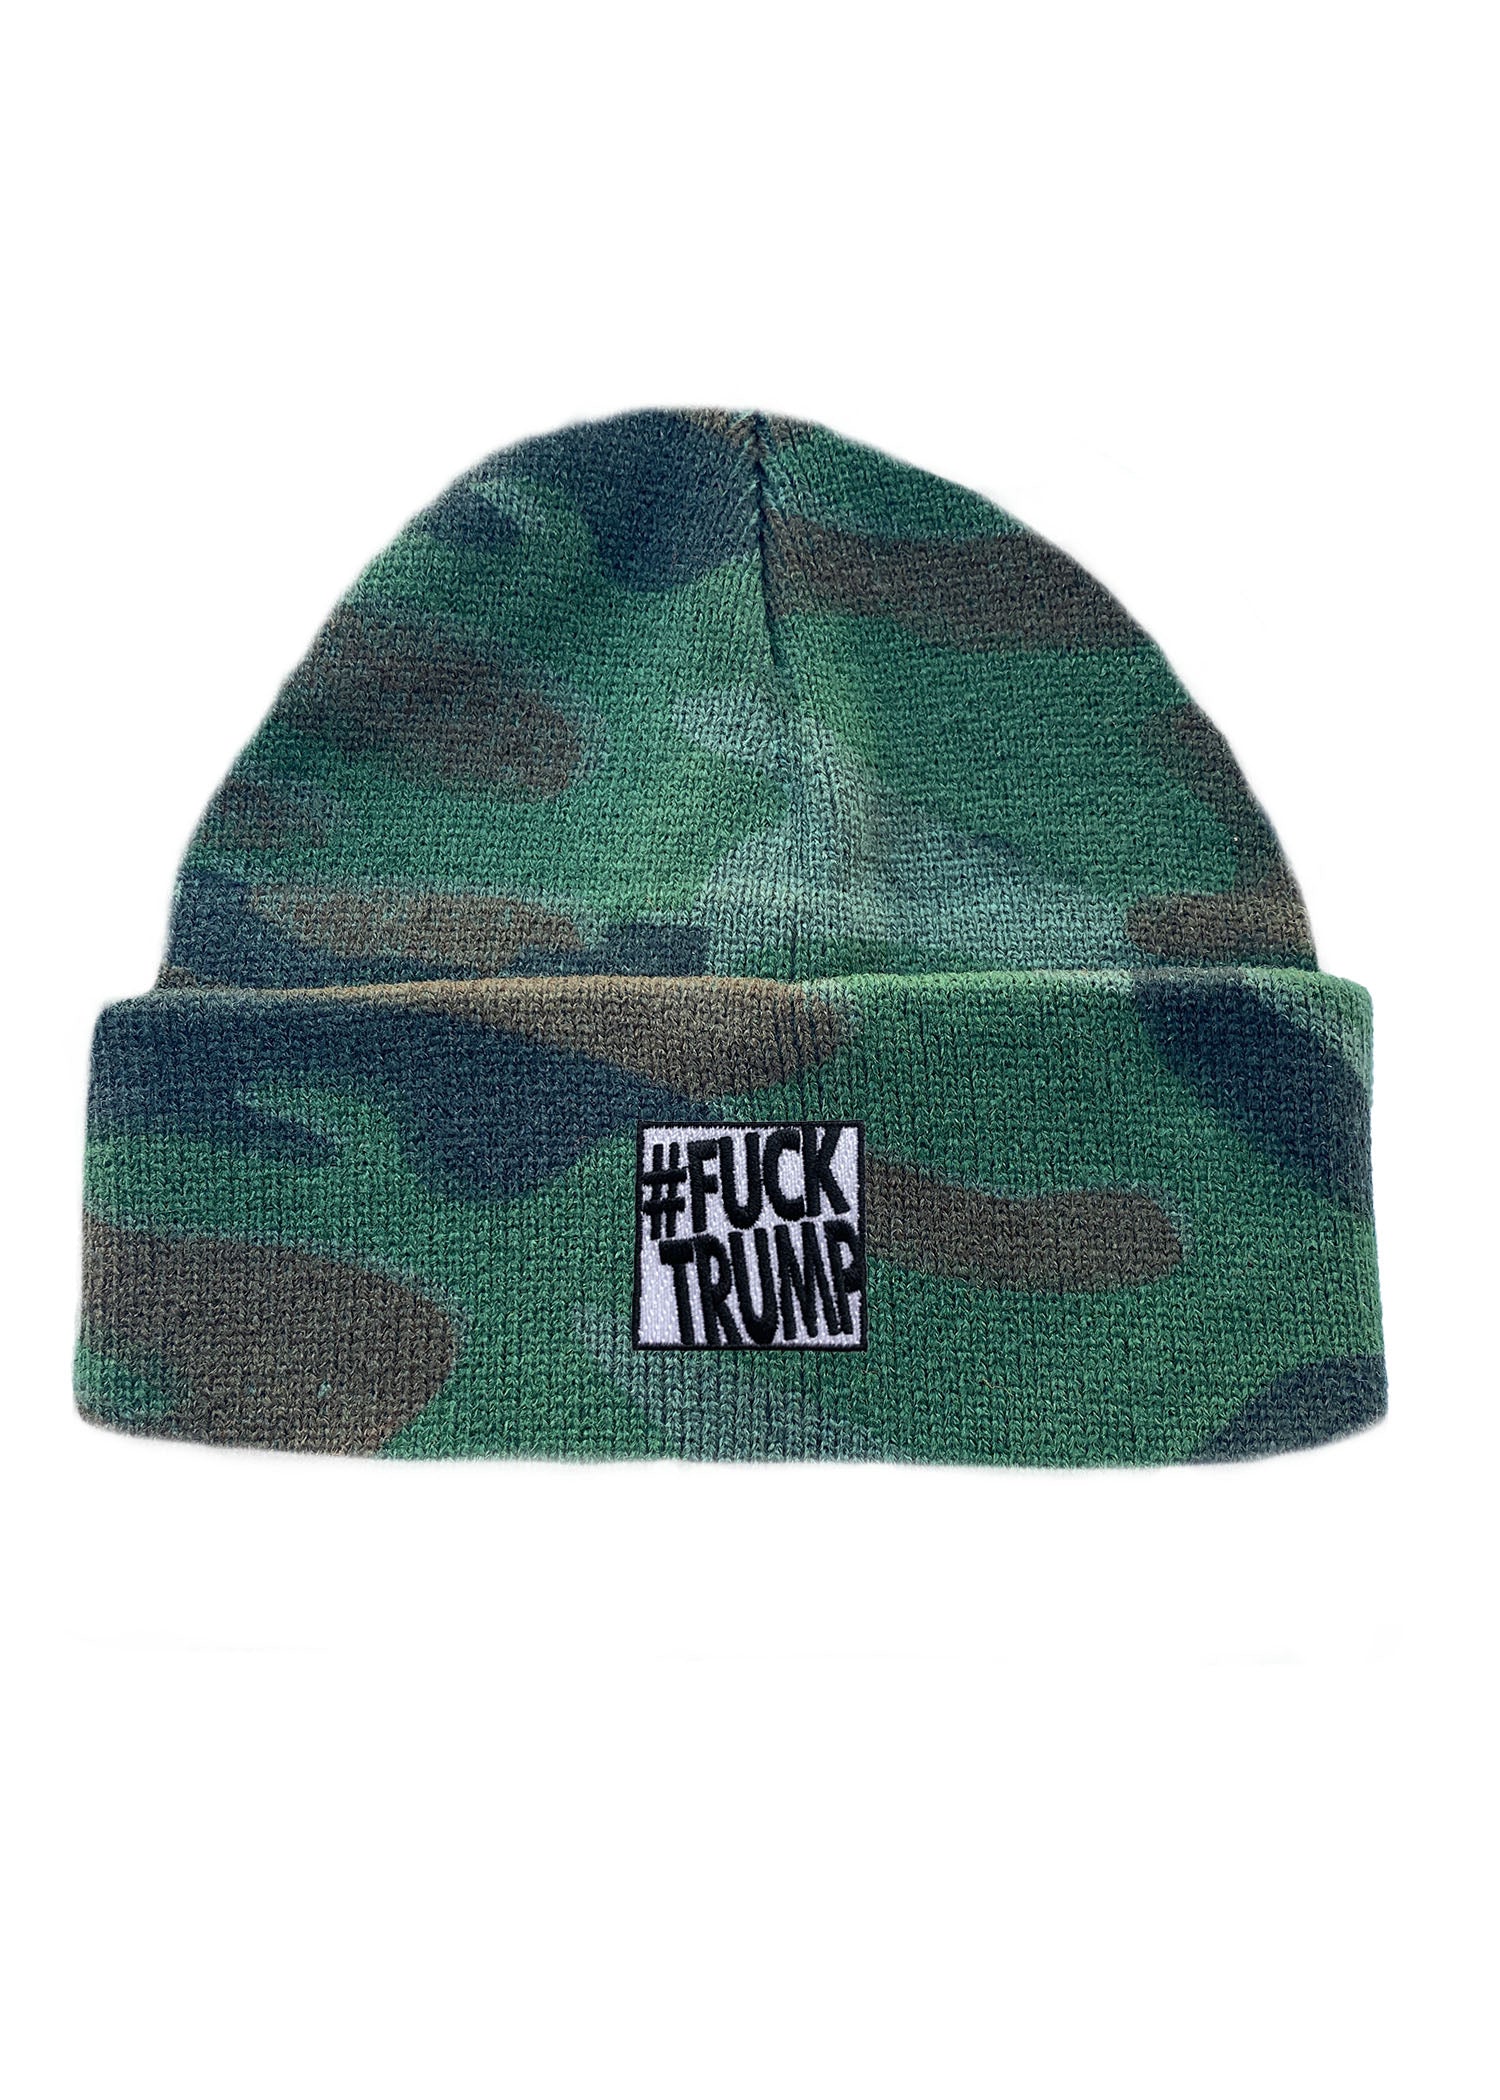 Oversized Fuck Trump Patch Classic Rollup Knit Beanie